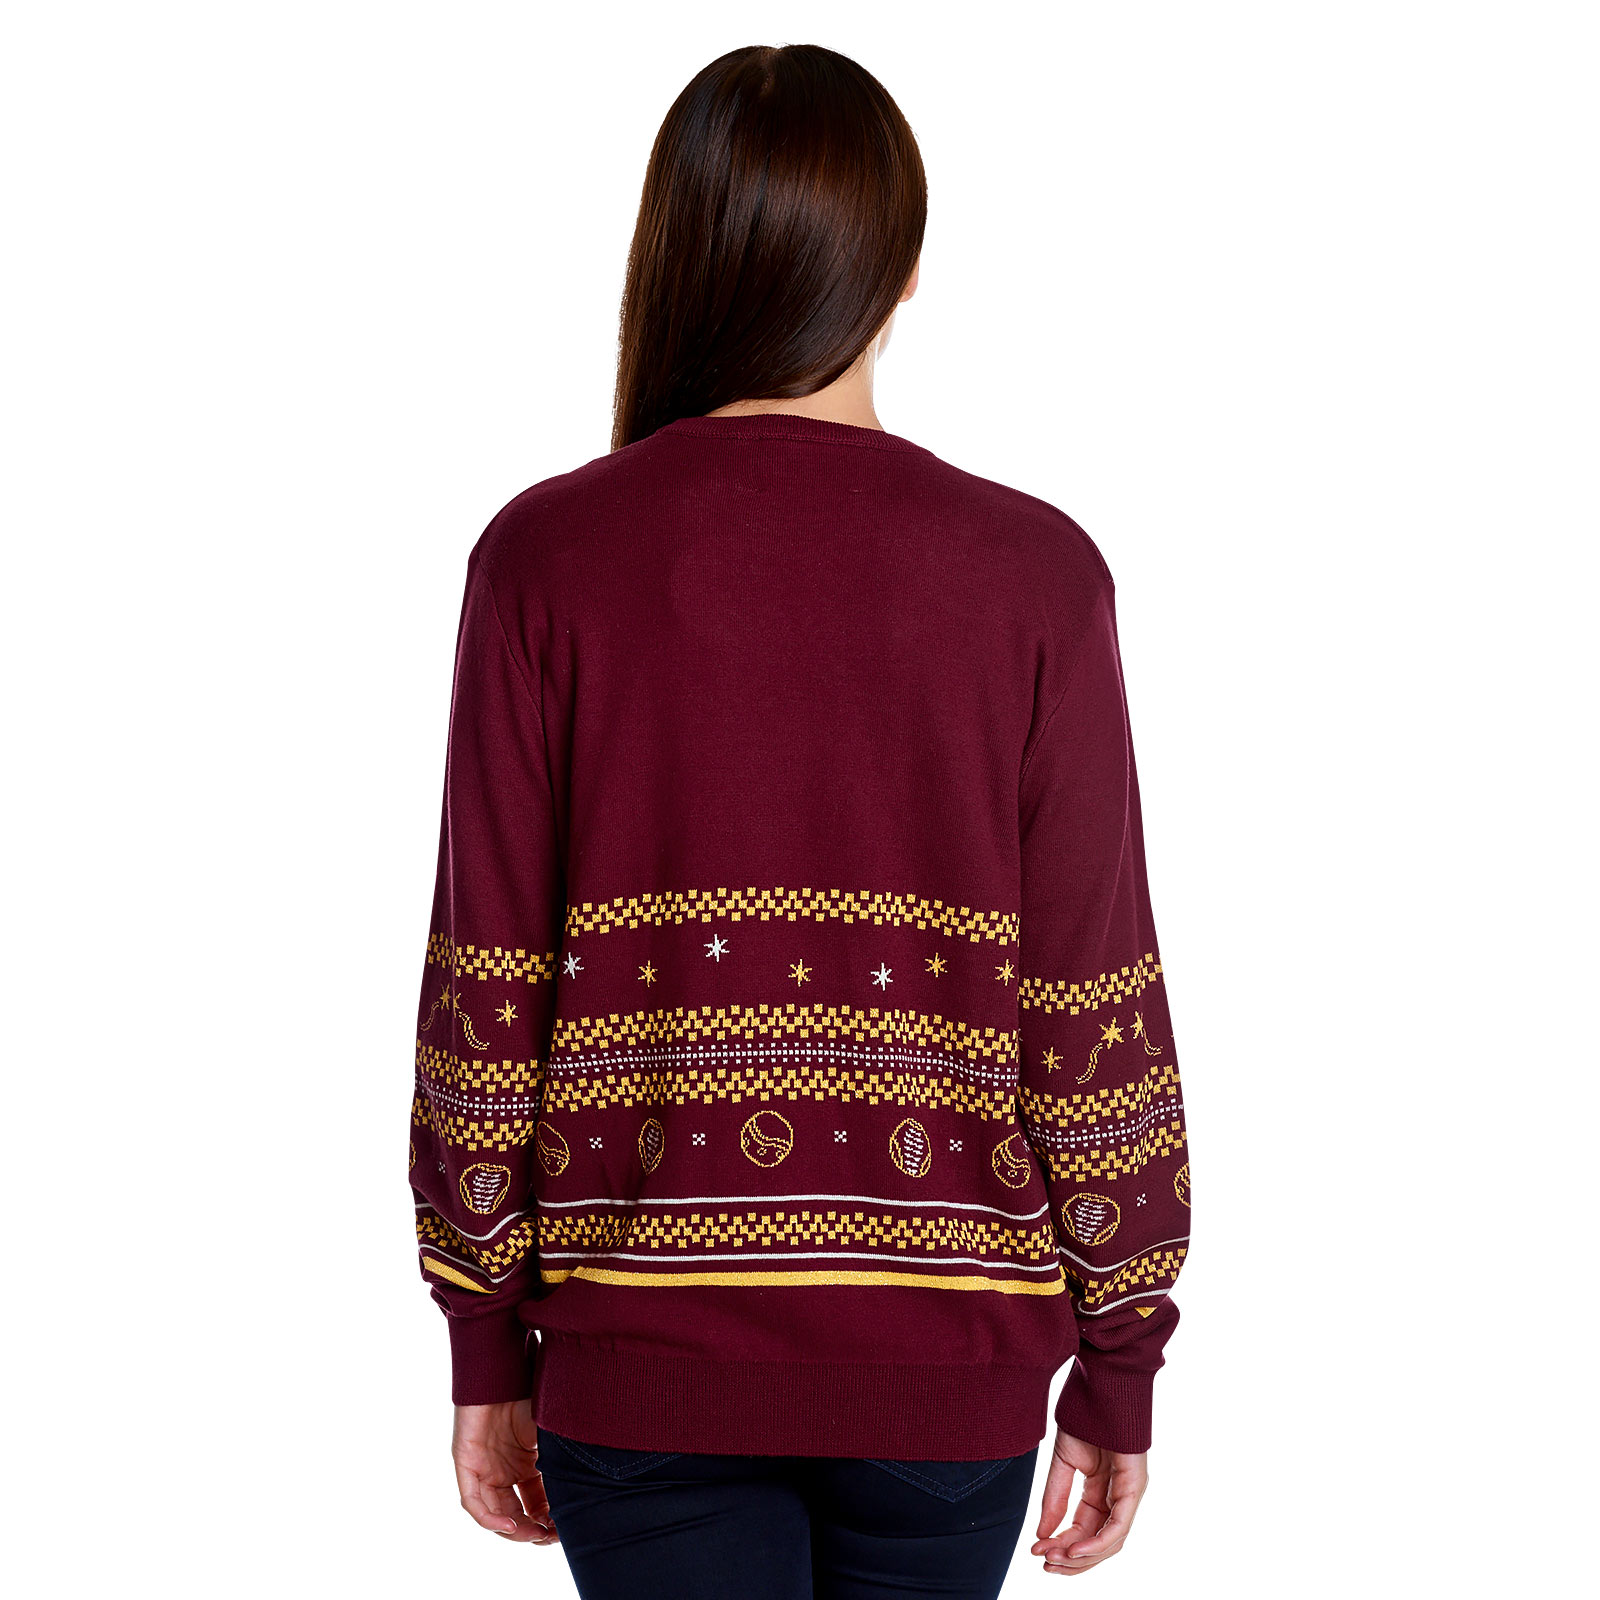 Harry Potter - Quidditch Knit Sweater